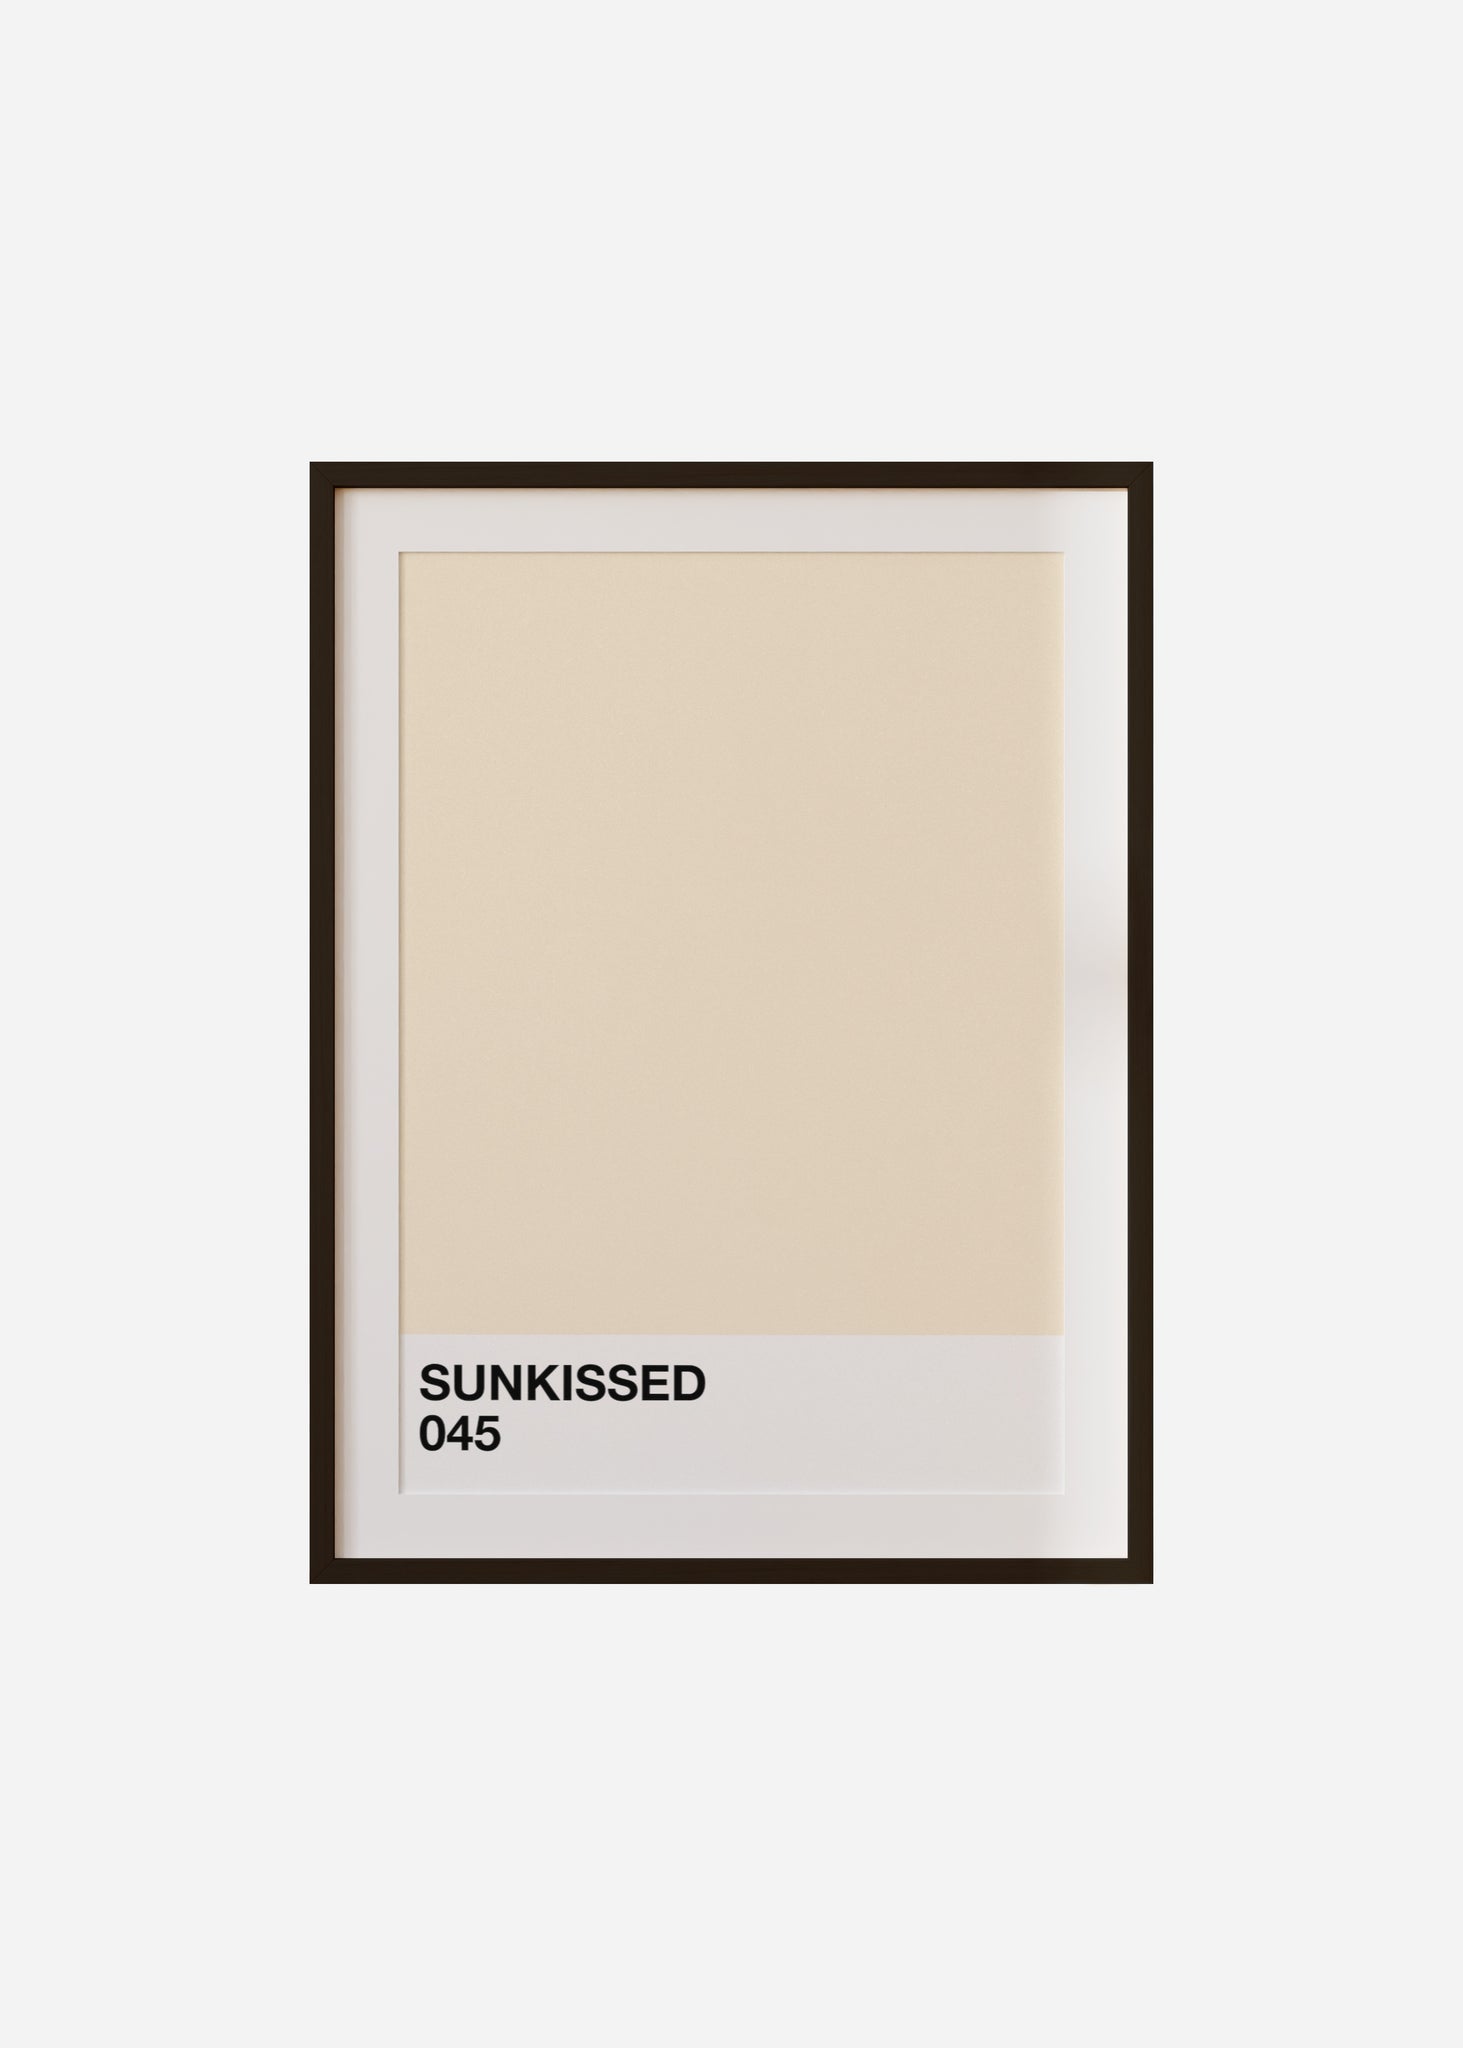 sunkissed Framed & Mounted Print